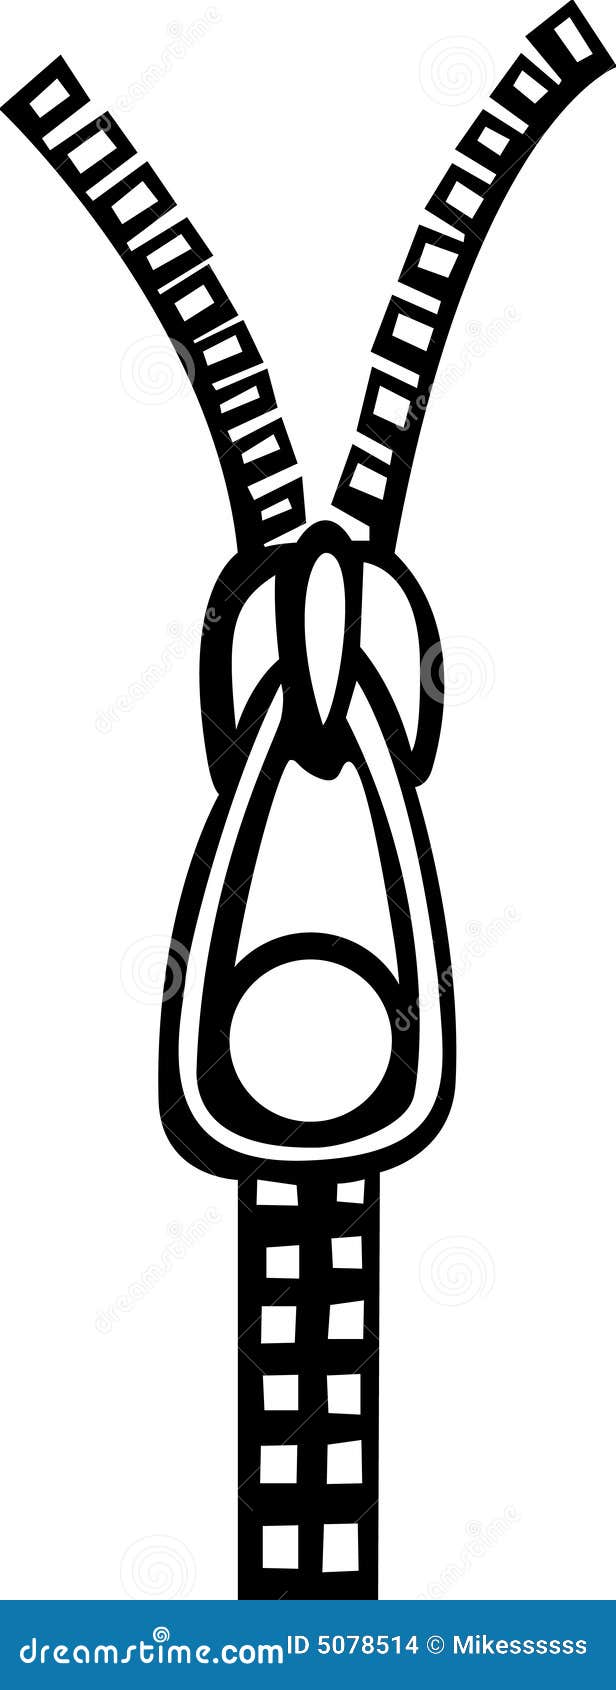 clipart picture of zipper - photo #17